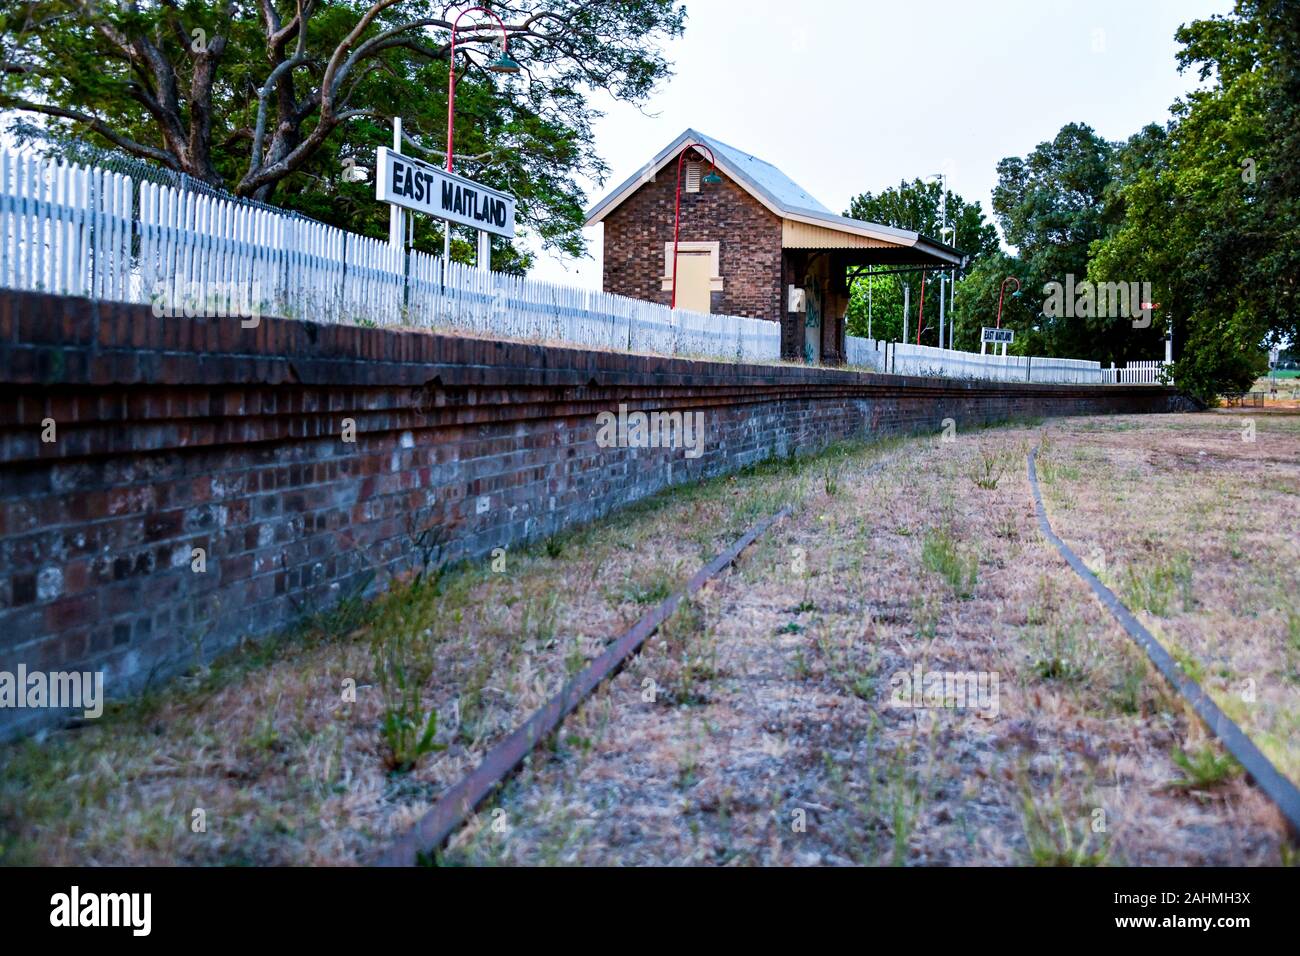 Abandoned Former East Maitland Station and Platform on the Defunct Morpeth Branch Line with Picket Fence, Signage, Lighting and Signal in Background Stock Photo